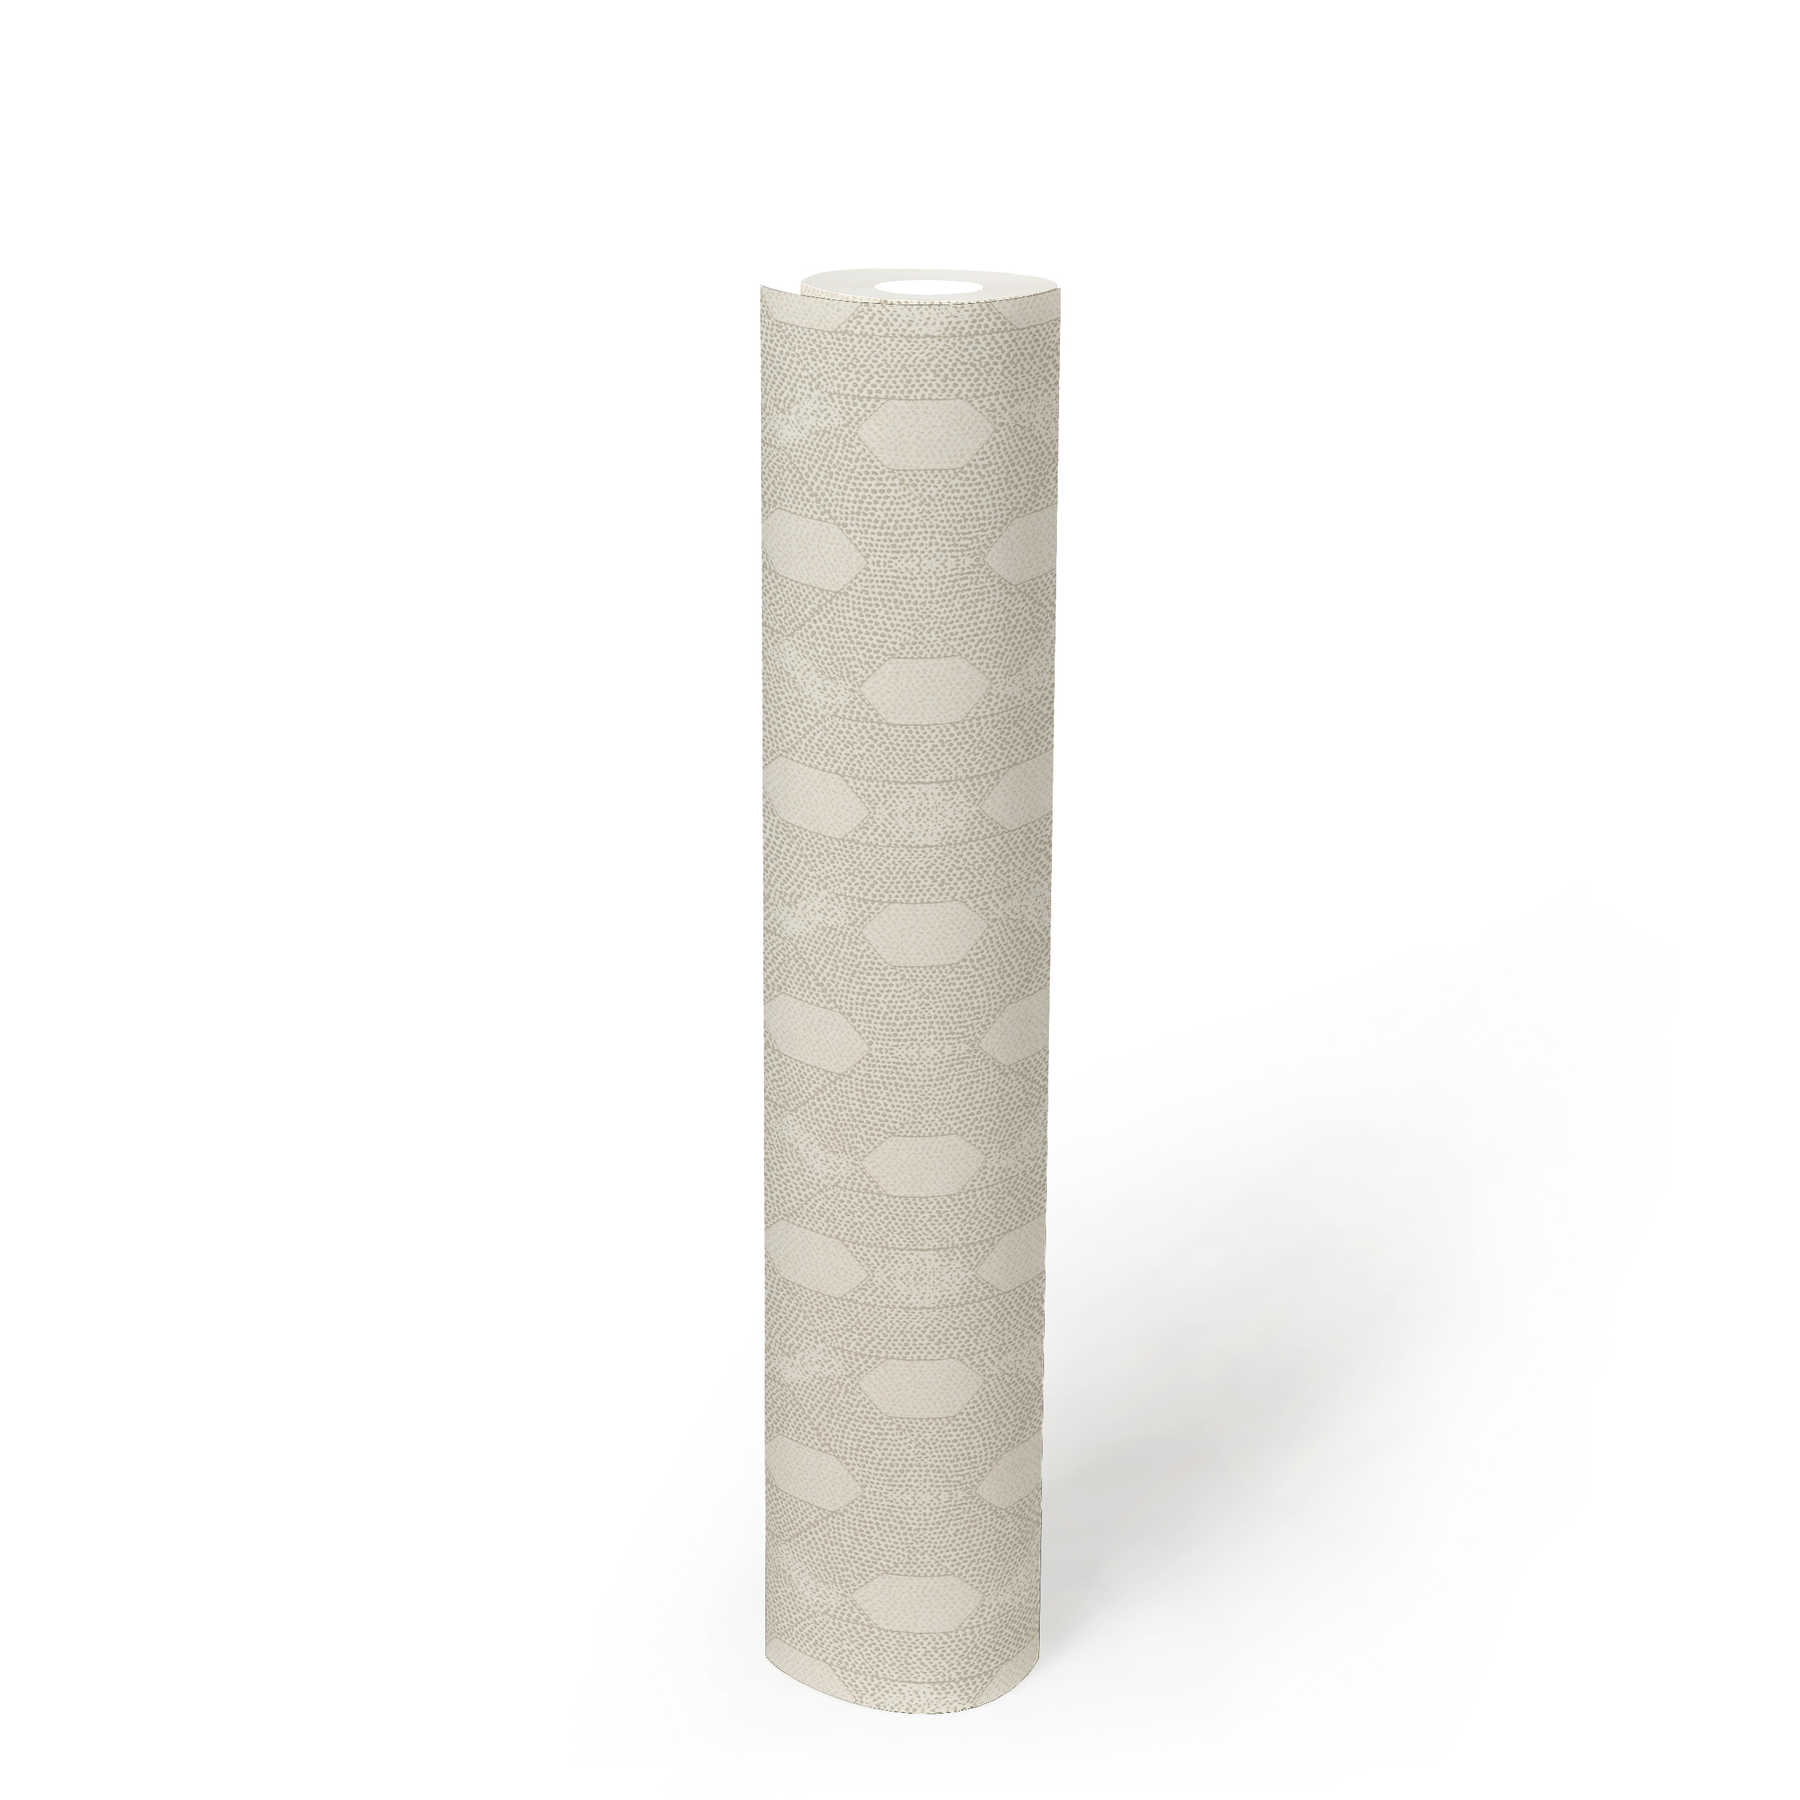             Non-woven wallpaper with geometric dots pattern - grey, gold, cream
        